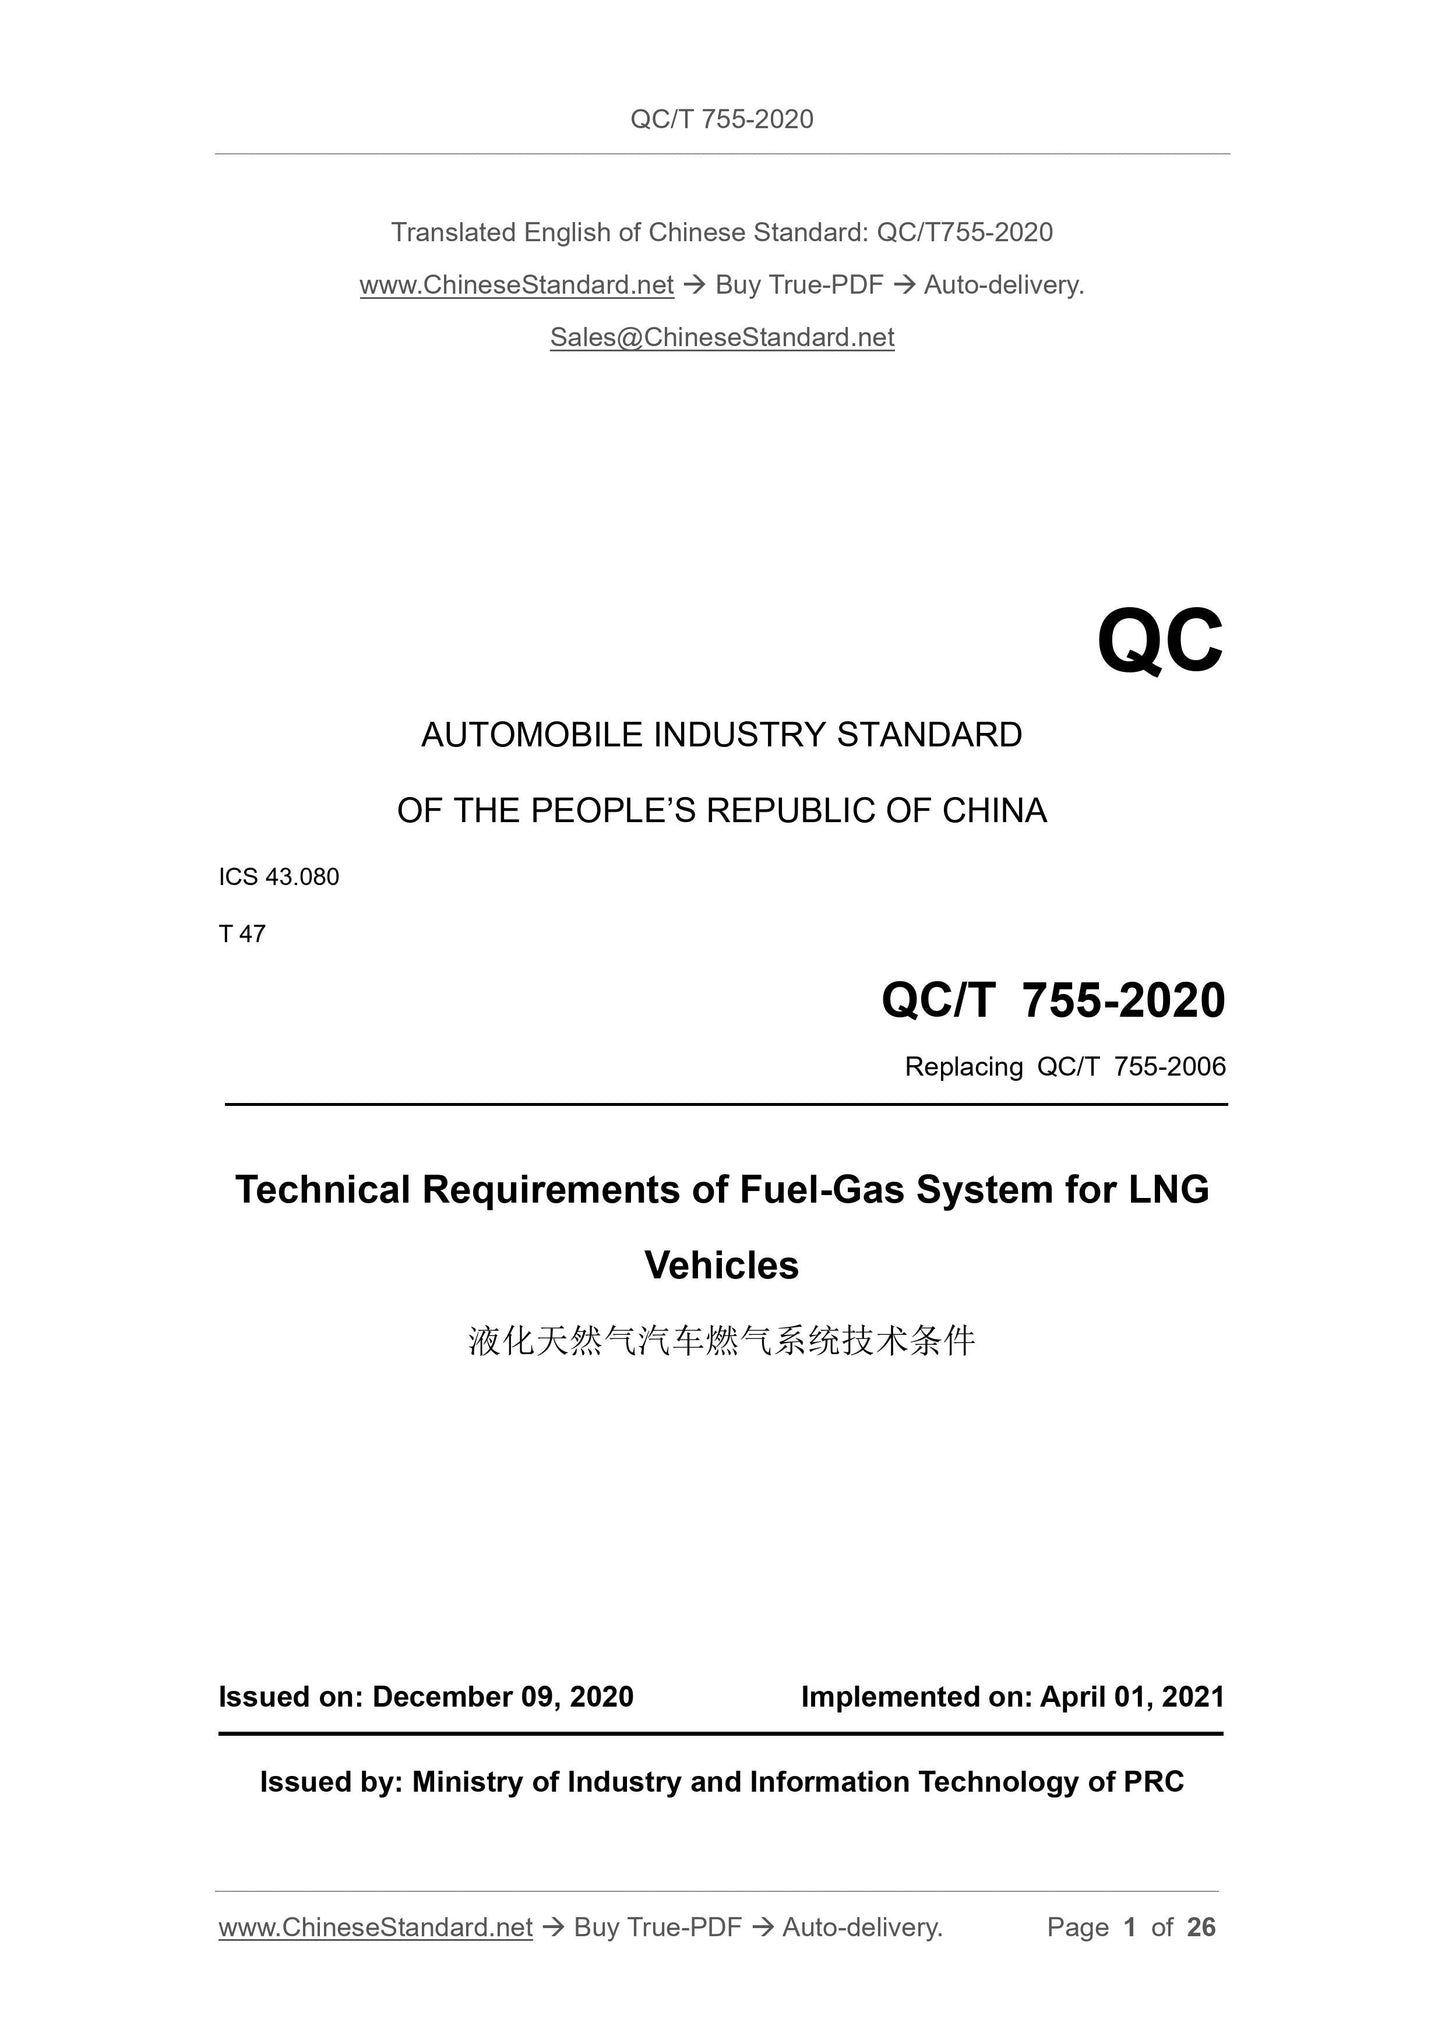 QC/T 755-2020 Page 1